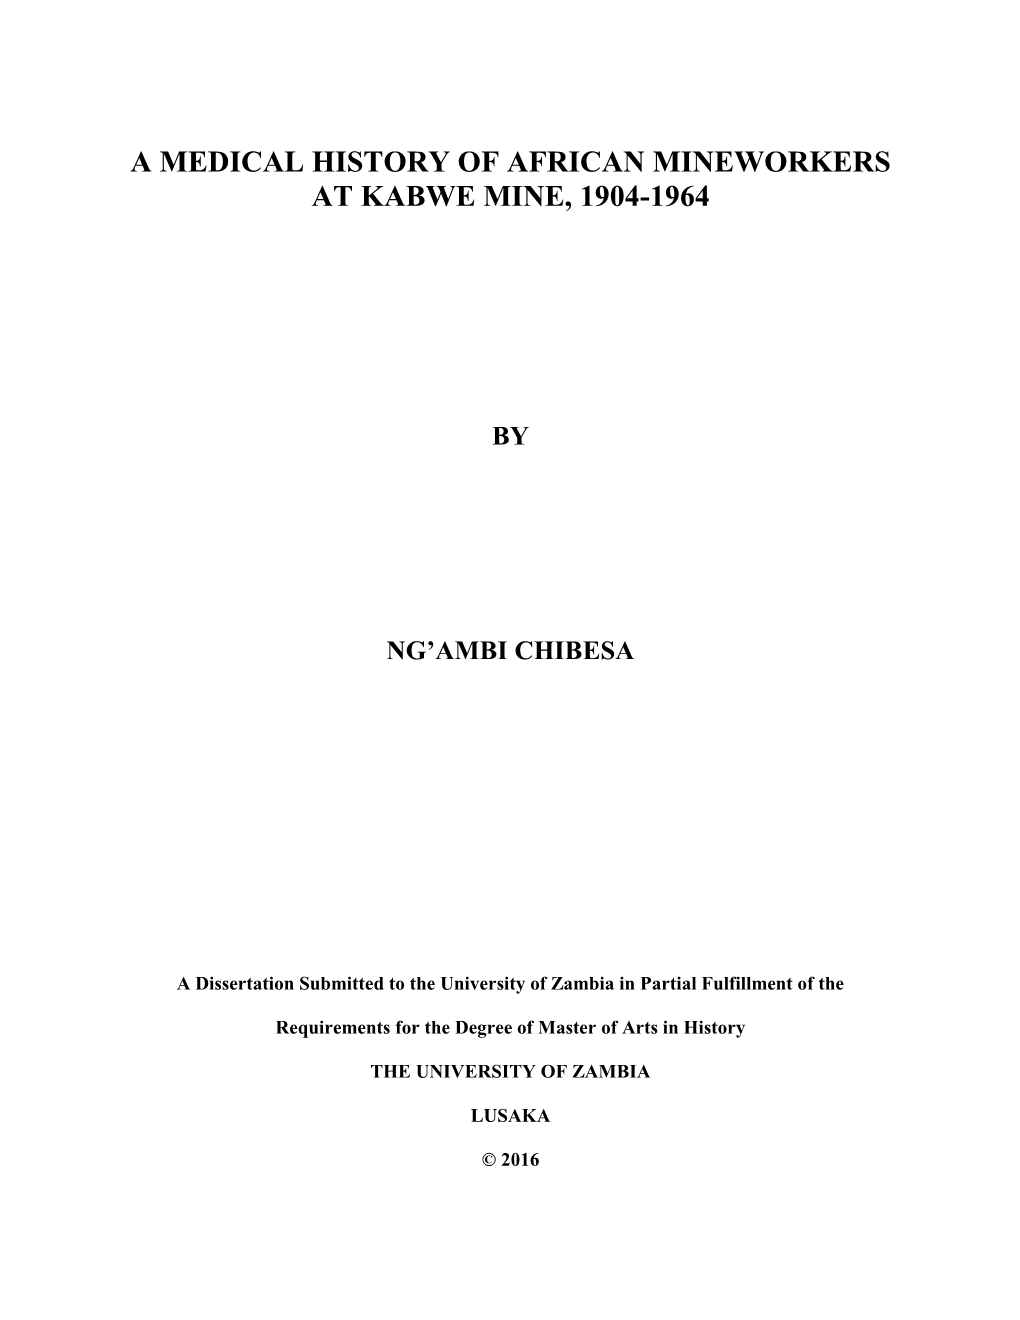 A Medical History of African Mineworkers at Kabwe Mine, 1904-1964